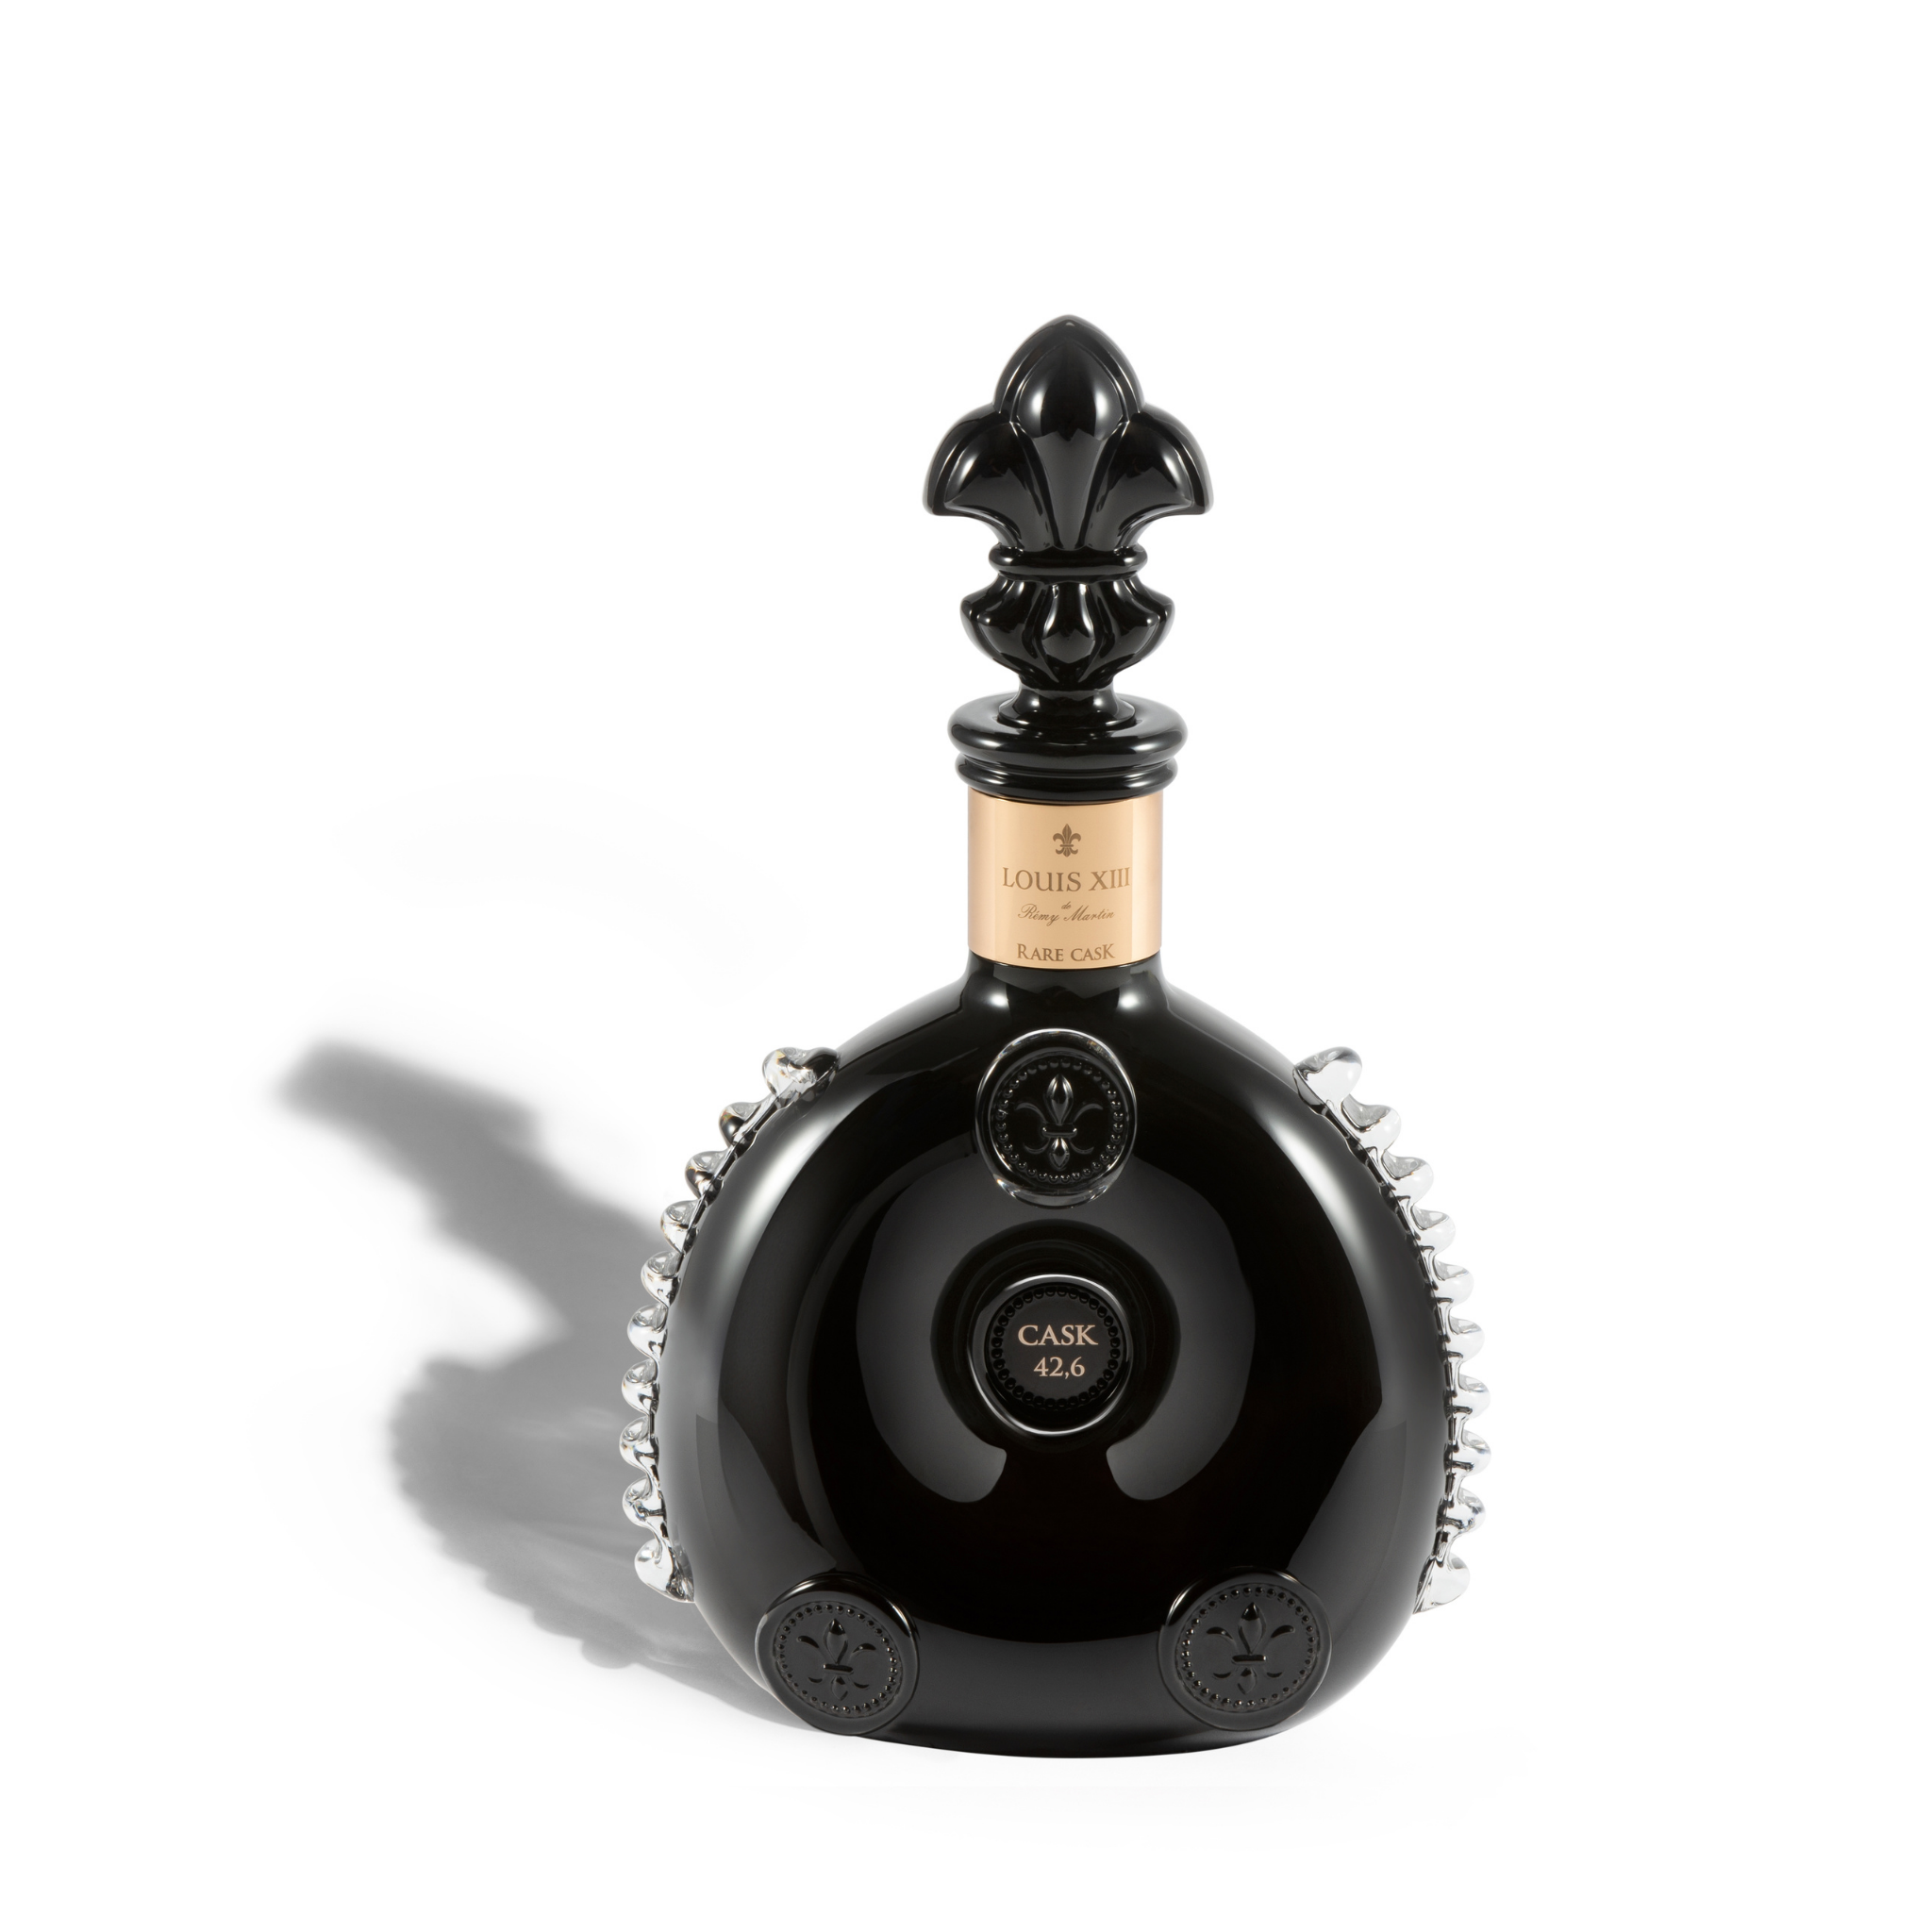 Louis XIII Cognac - The Thesaurus ⋆ Undefinable Vision TV